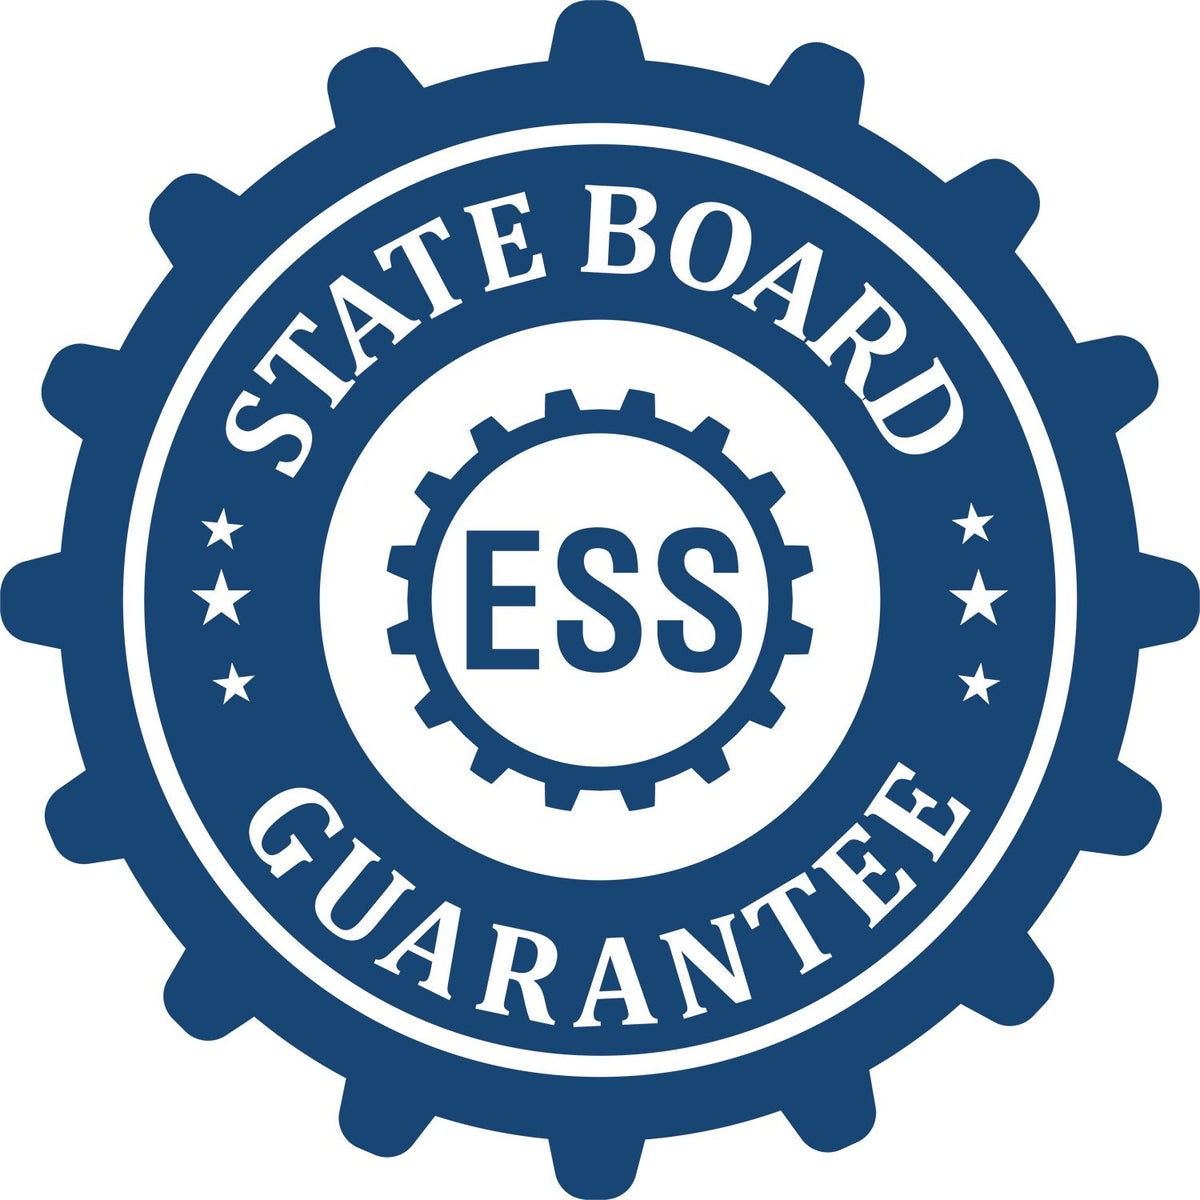 An emblem in a gear shape illustrating a state board guarantee for the State of Massachusetts Extended Long Reach Engineer Seal product.